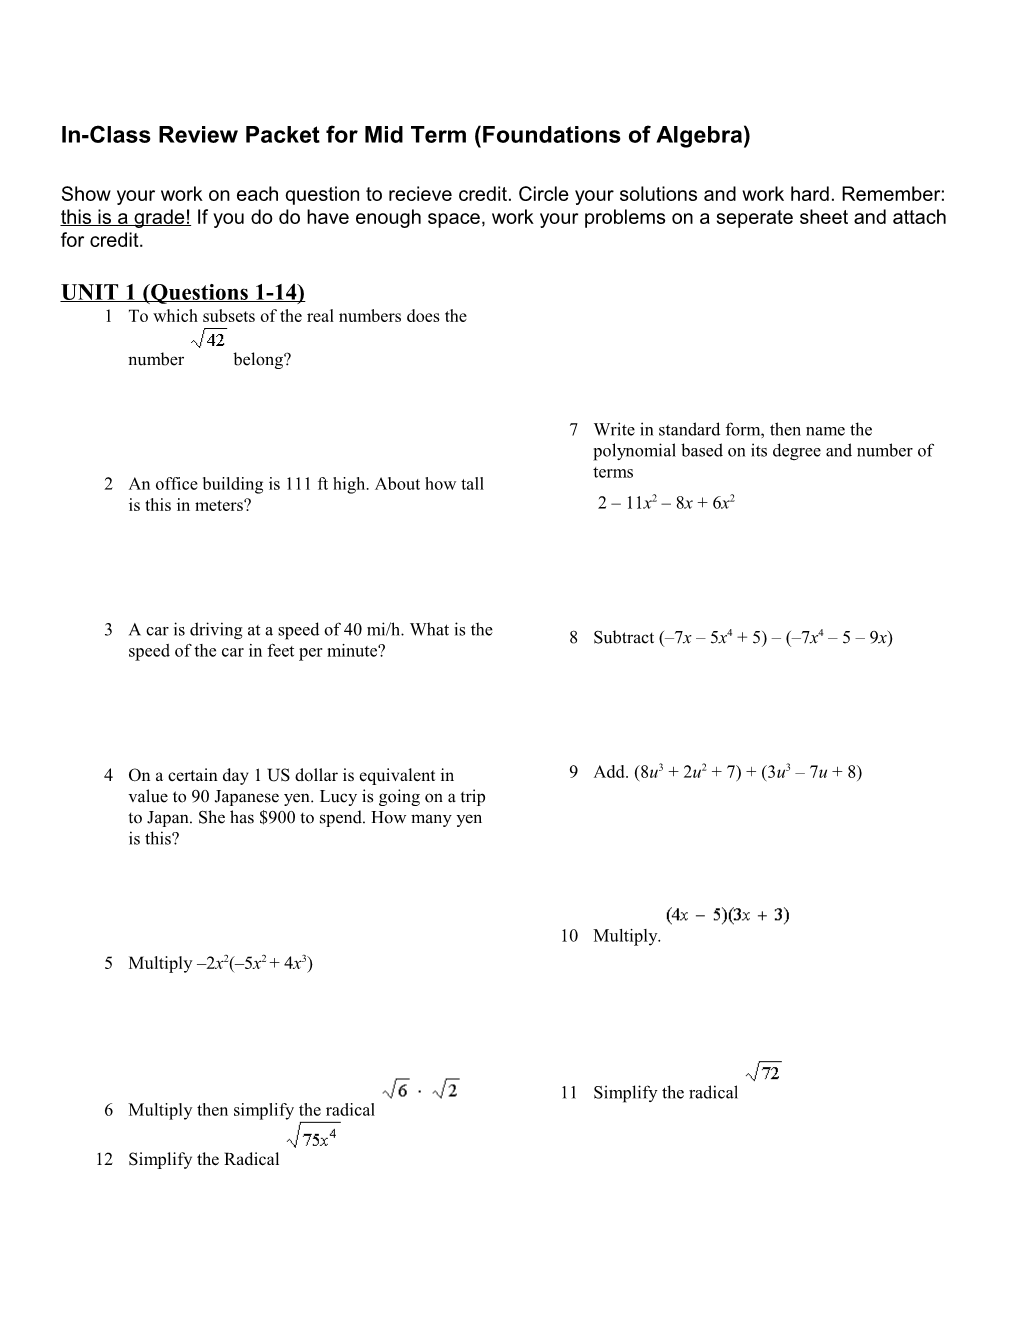 In-Class Review Packet for Mid Term (Foundations of Algebra)